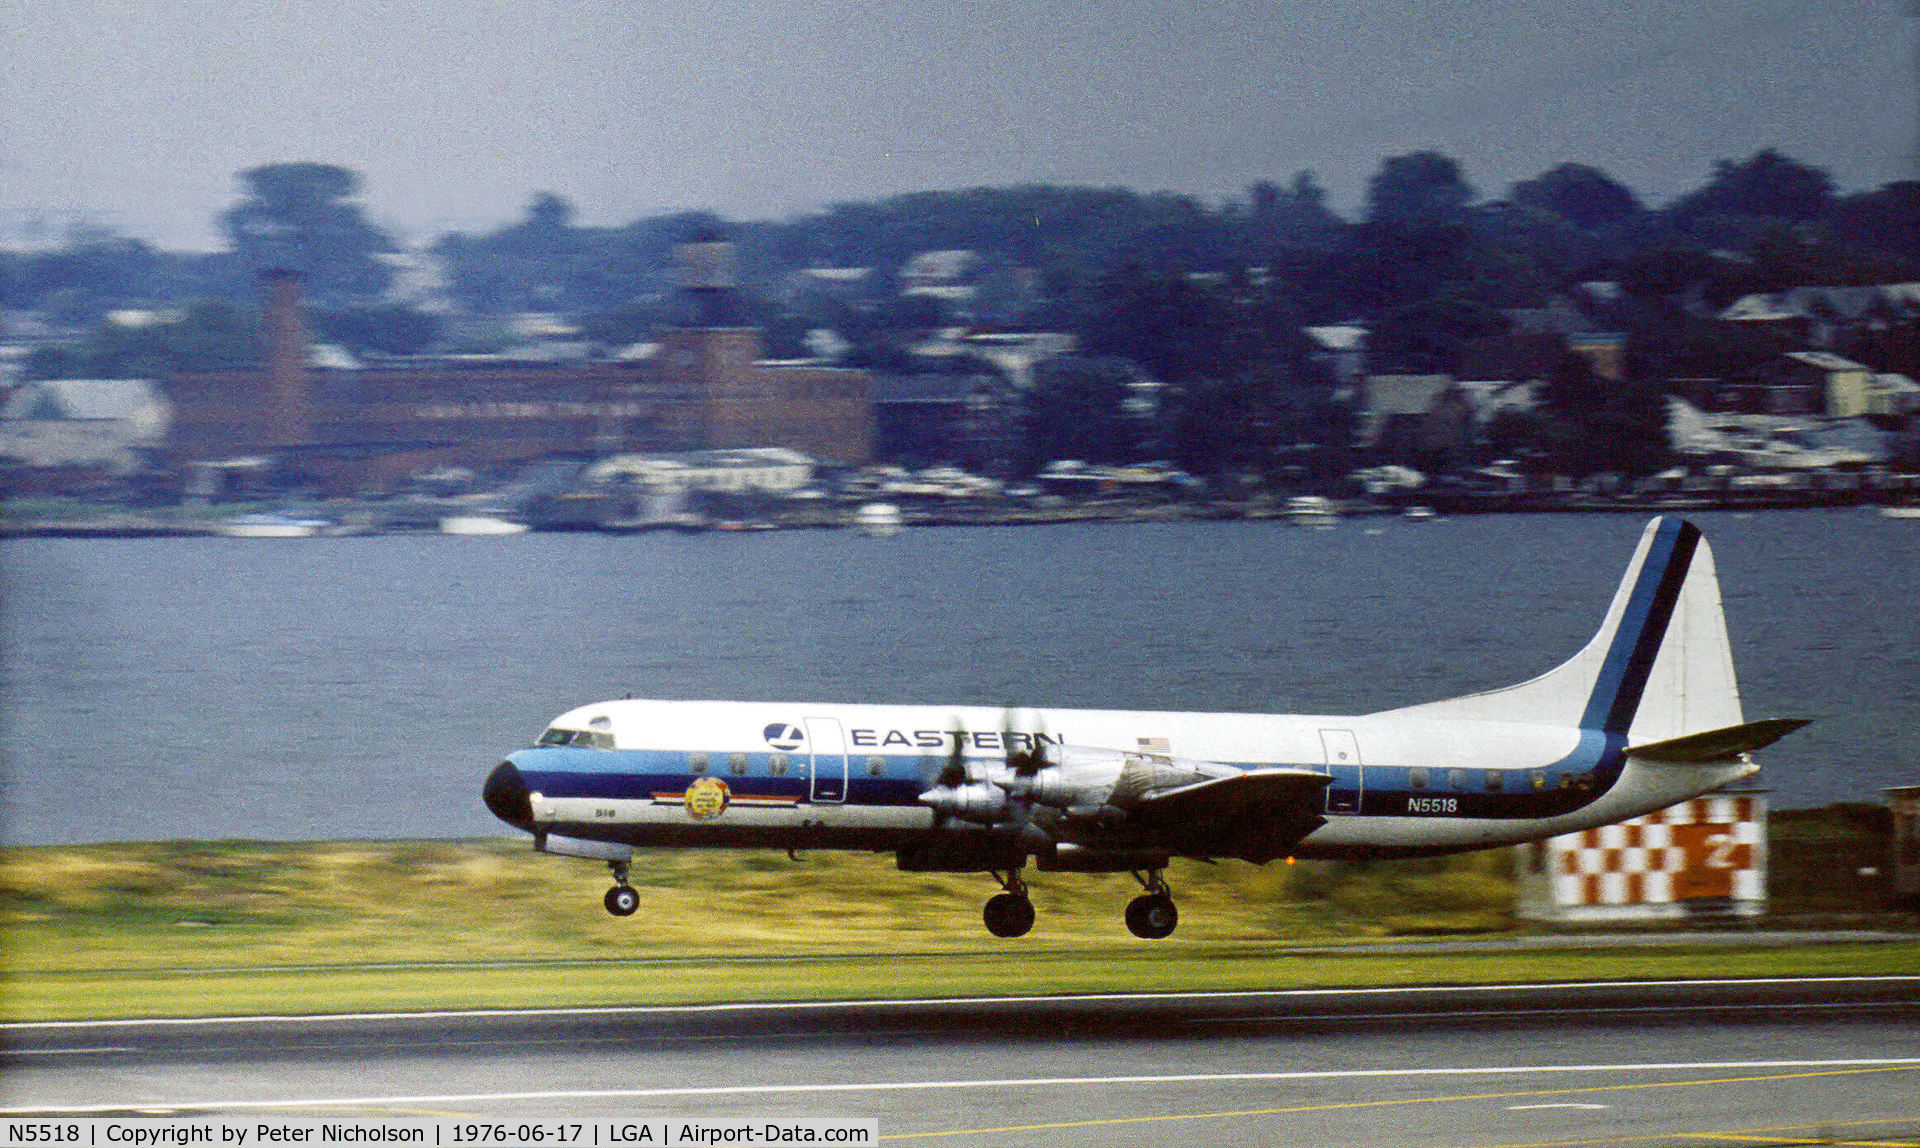 N5518, 1958 Lockheed L-188A Electra C/N 1026, Eastern Airlines Electra as seen at La Guardia in the Summer of 1976.